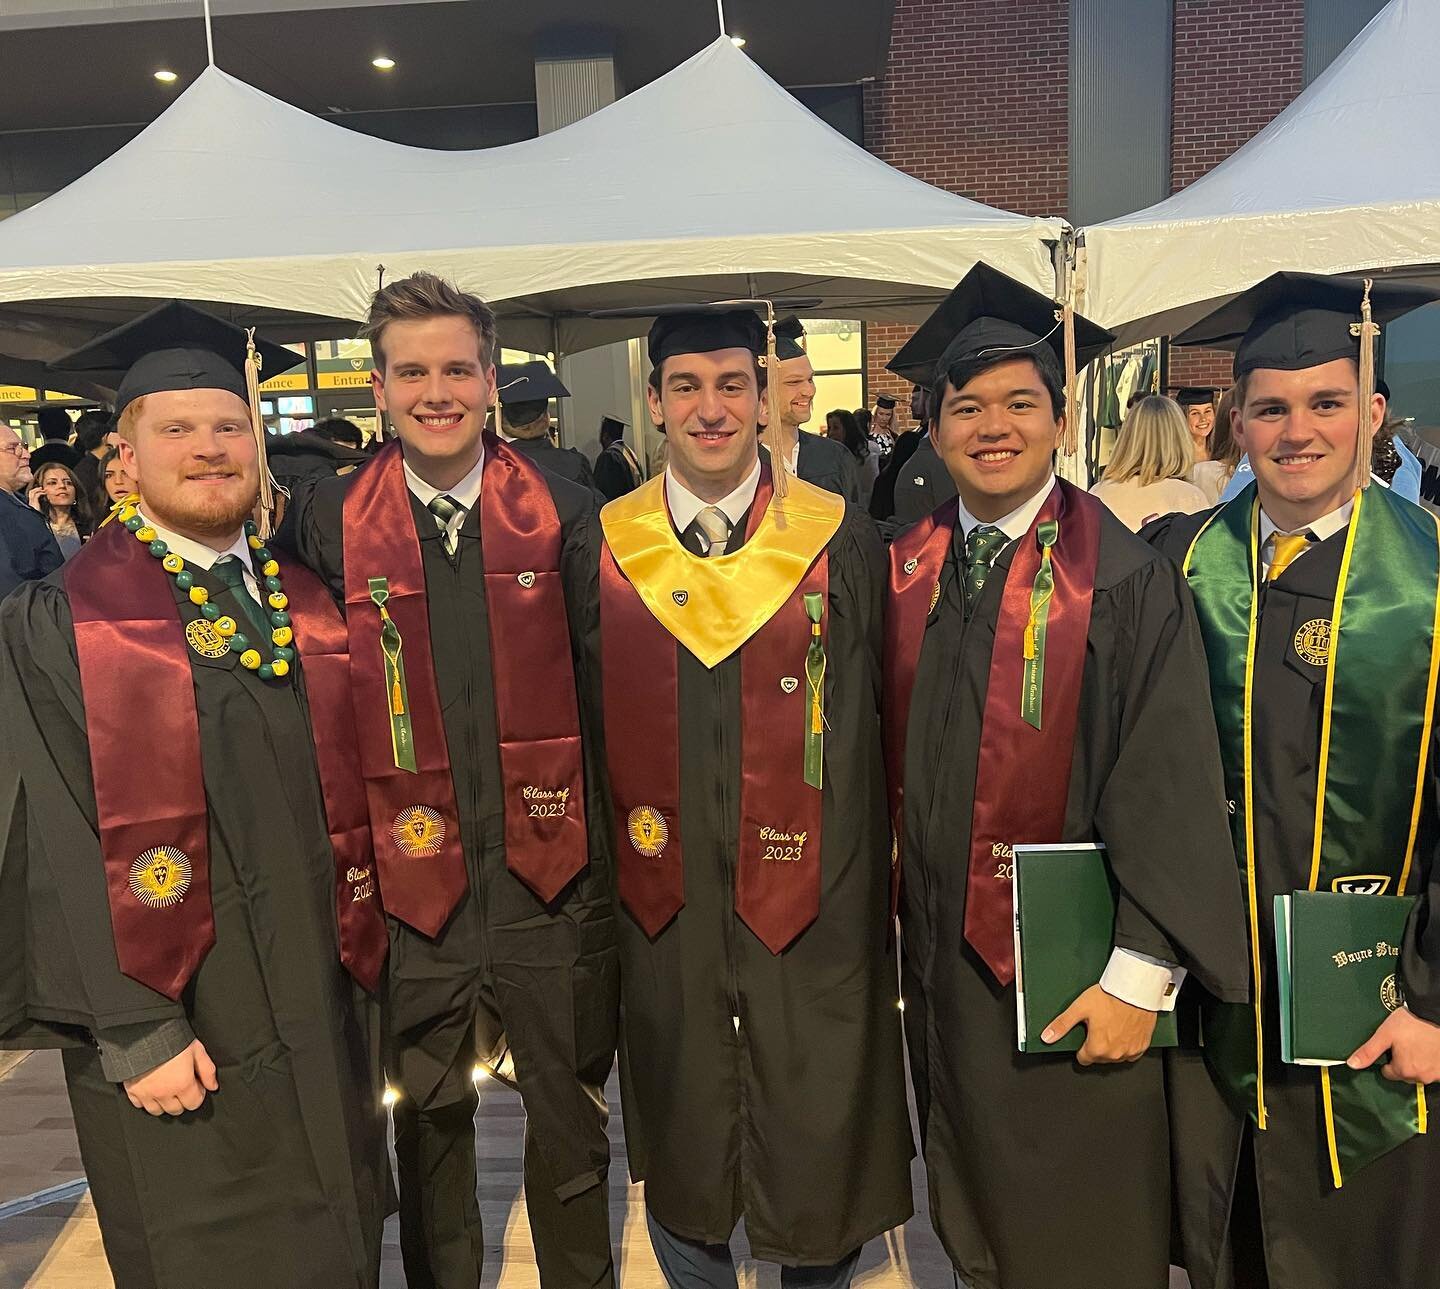 Congratulations to all of our seniors who have officially graduated this past week. You all have contributed so much in bettering our chapter, all of you definitely left this place better than when you arrived. We will all miss you in &phi;&phi;&kapp